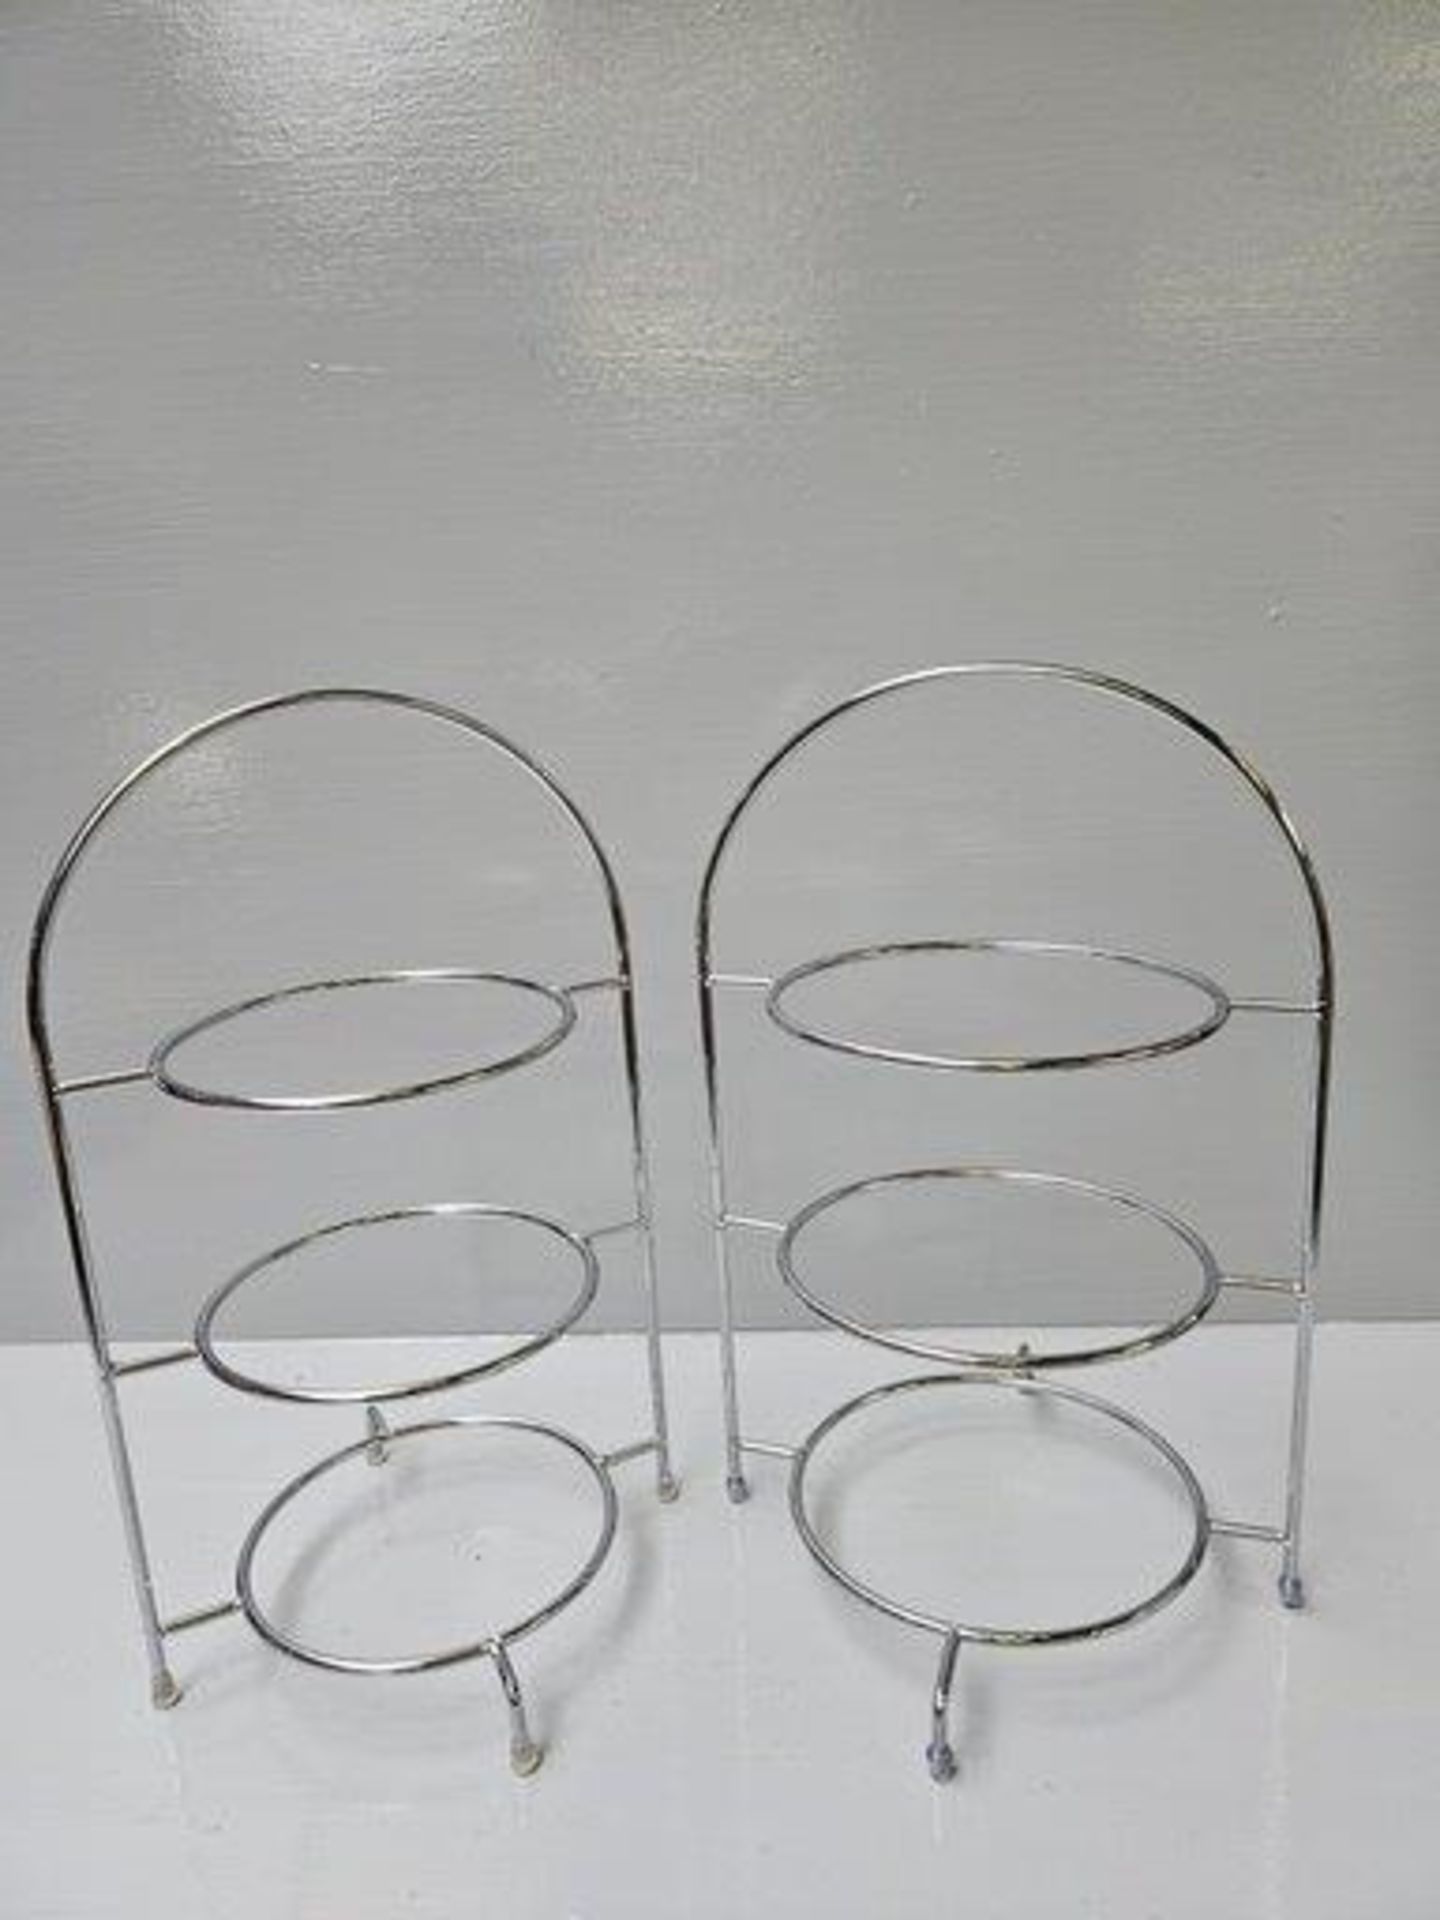 Box Of 12 Plated Cake Stands - Image 2 of 2